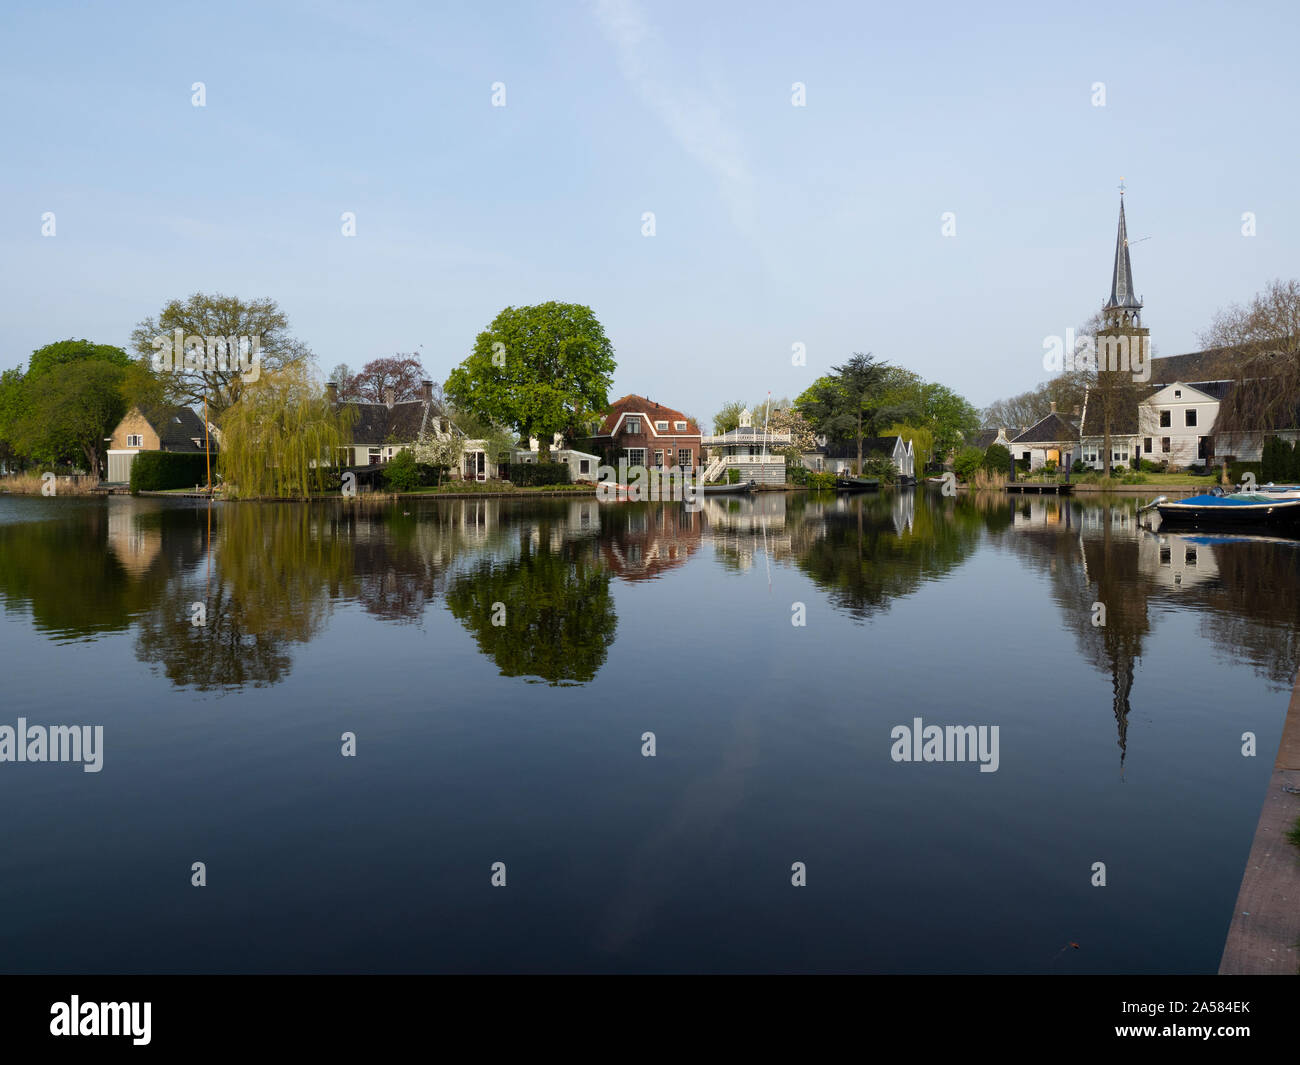 Buildings in old town of Broek in Waterland reflecting in water, North Holland, Netherlands Stock Photo